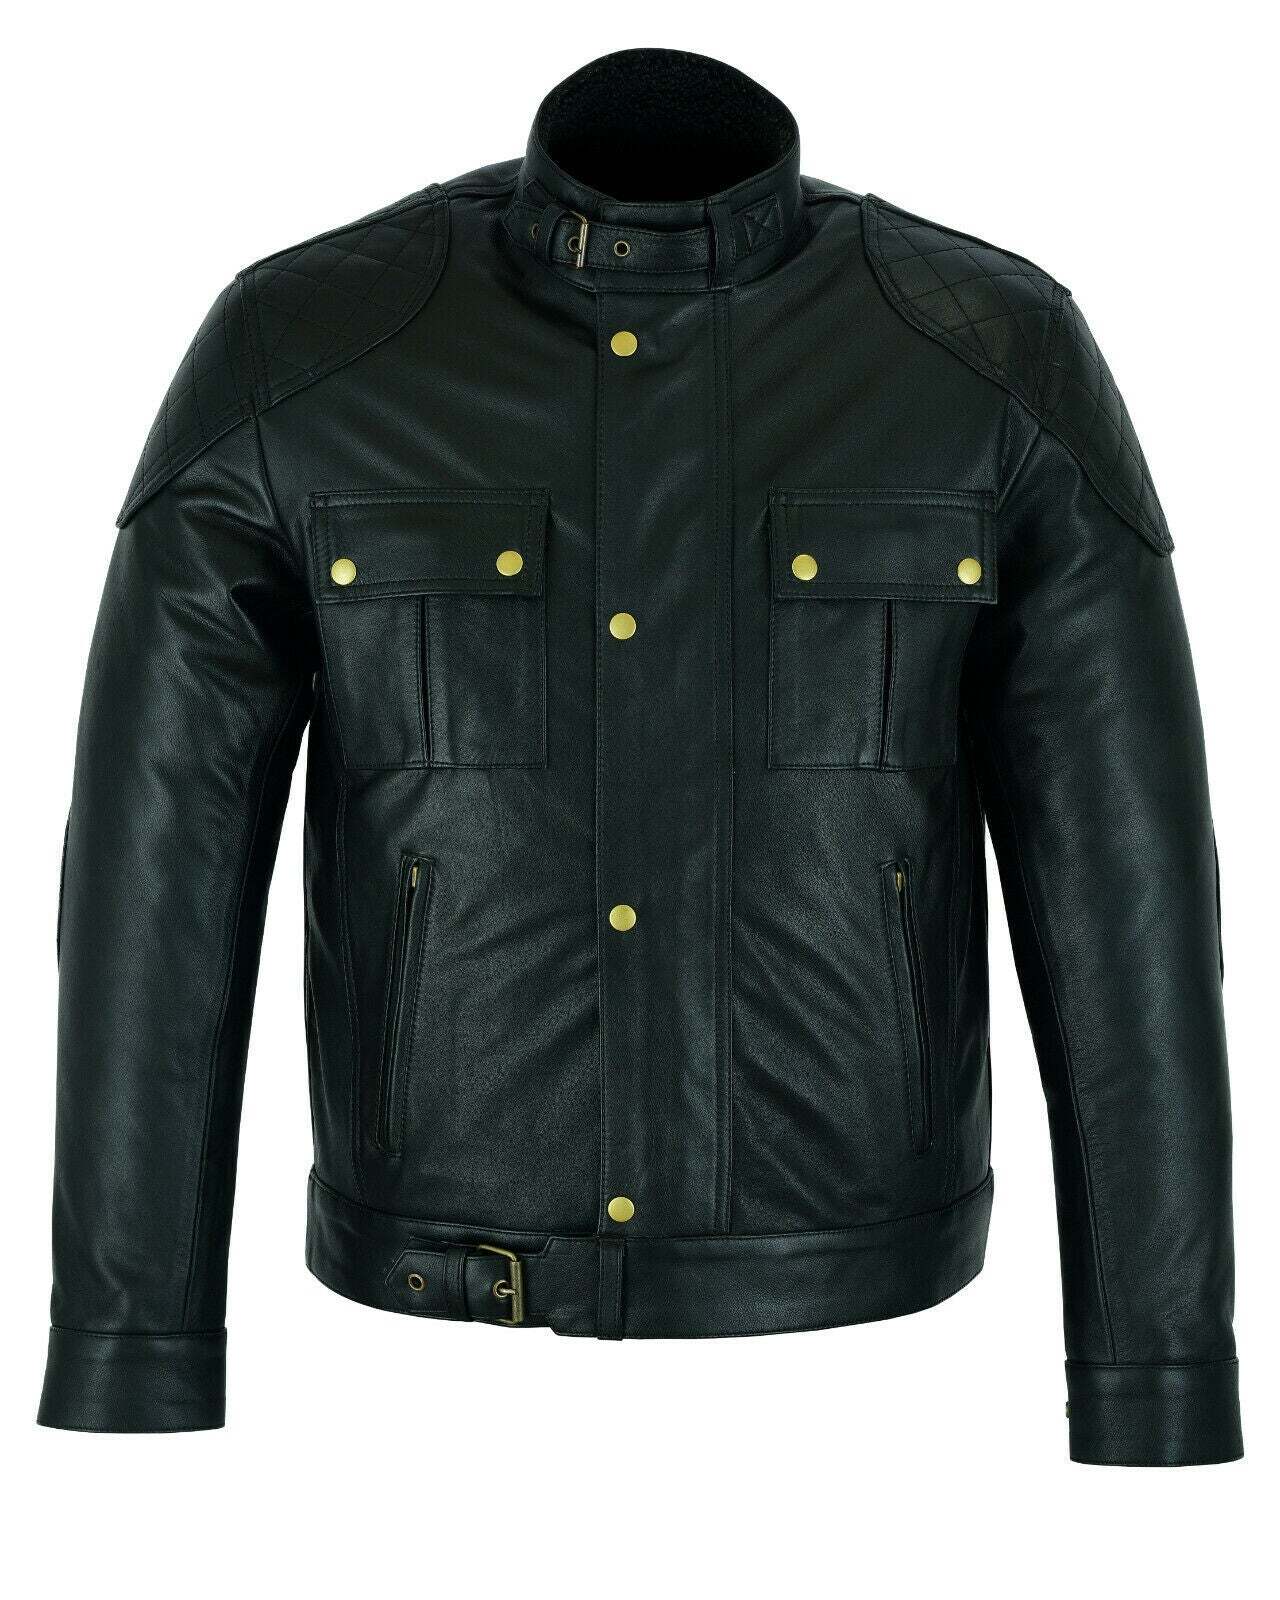 Mens Soft Cowhide Fashion Leather Jacket Biker Style with Fur & Armour Pockets